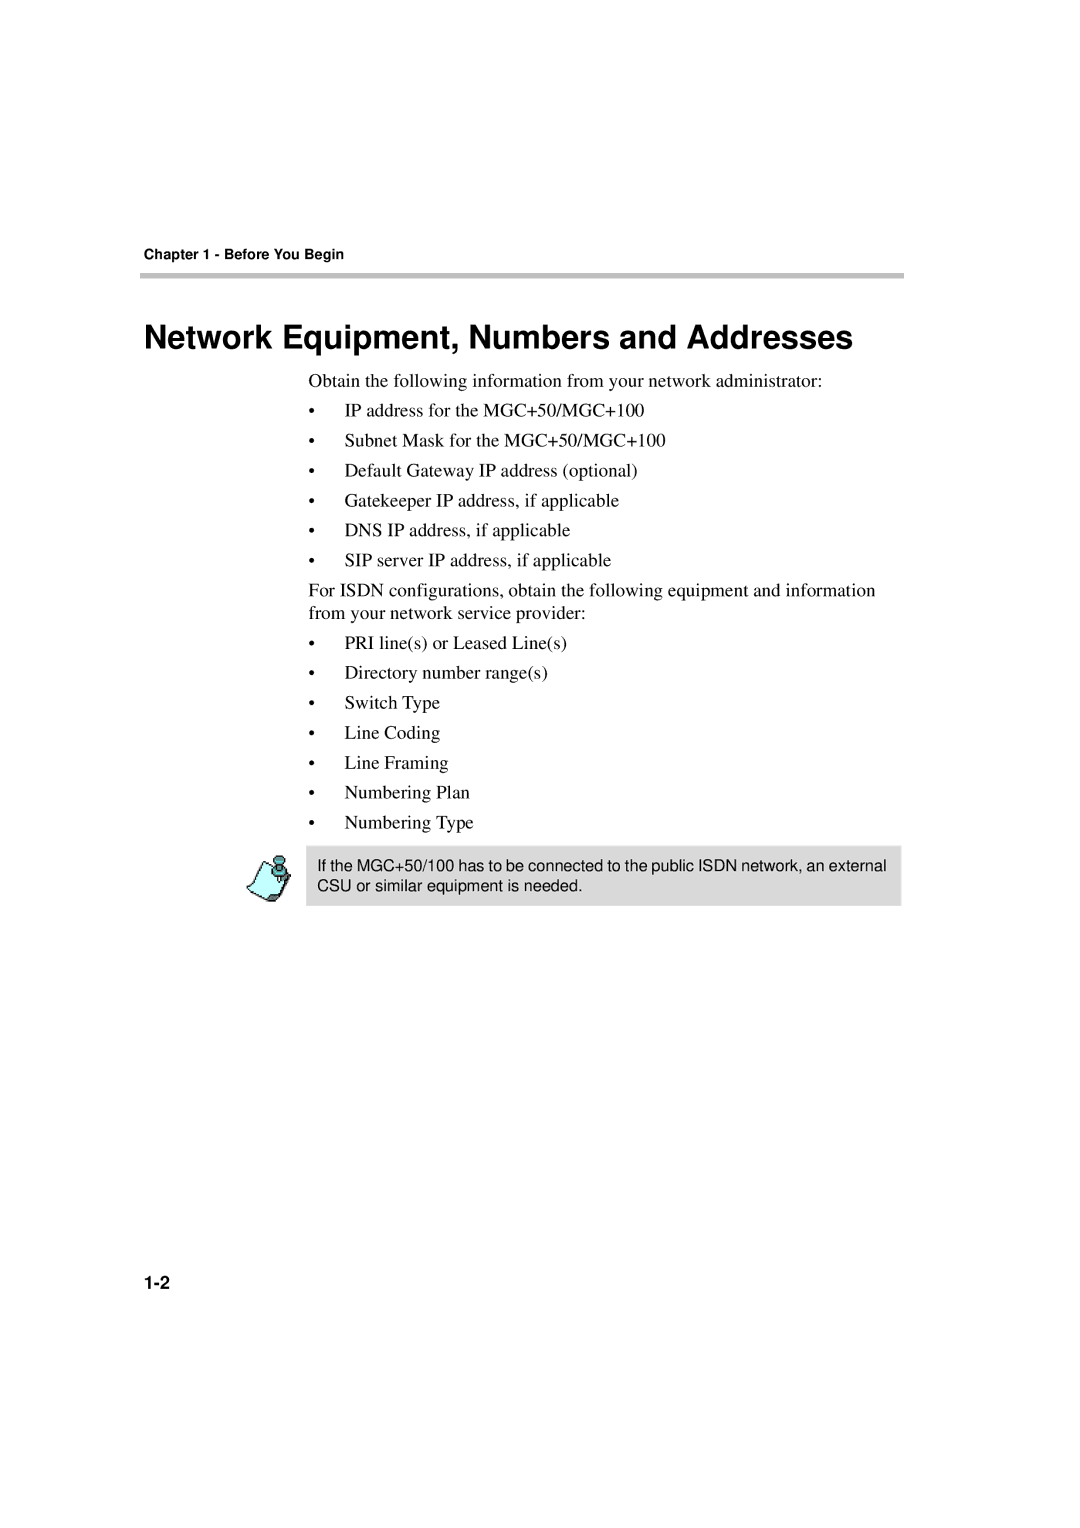 Polycom DOC2231A manual Network Equipment, Numbers and Addresses 